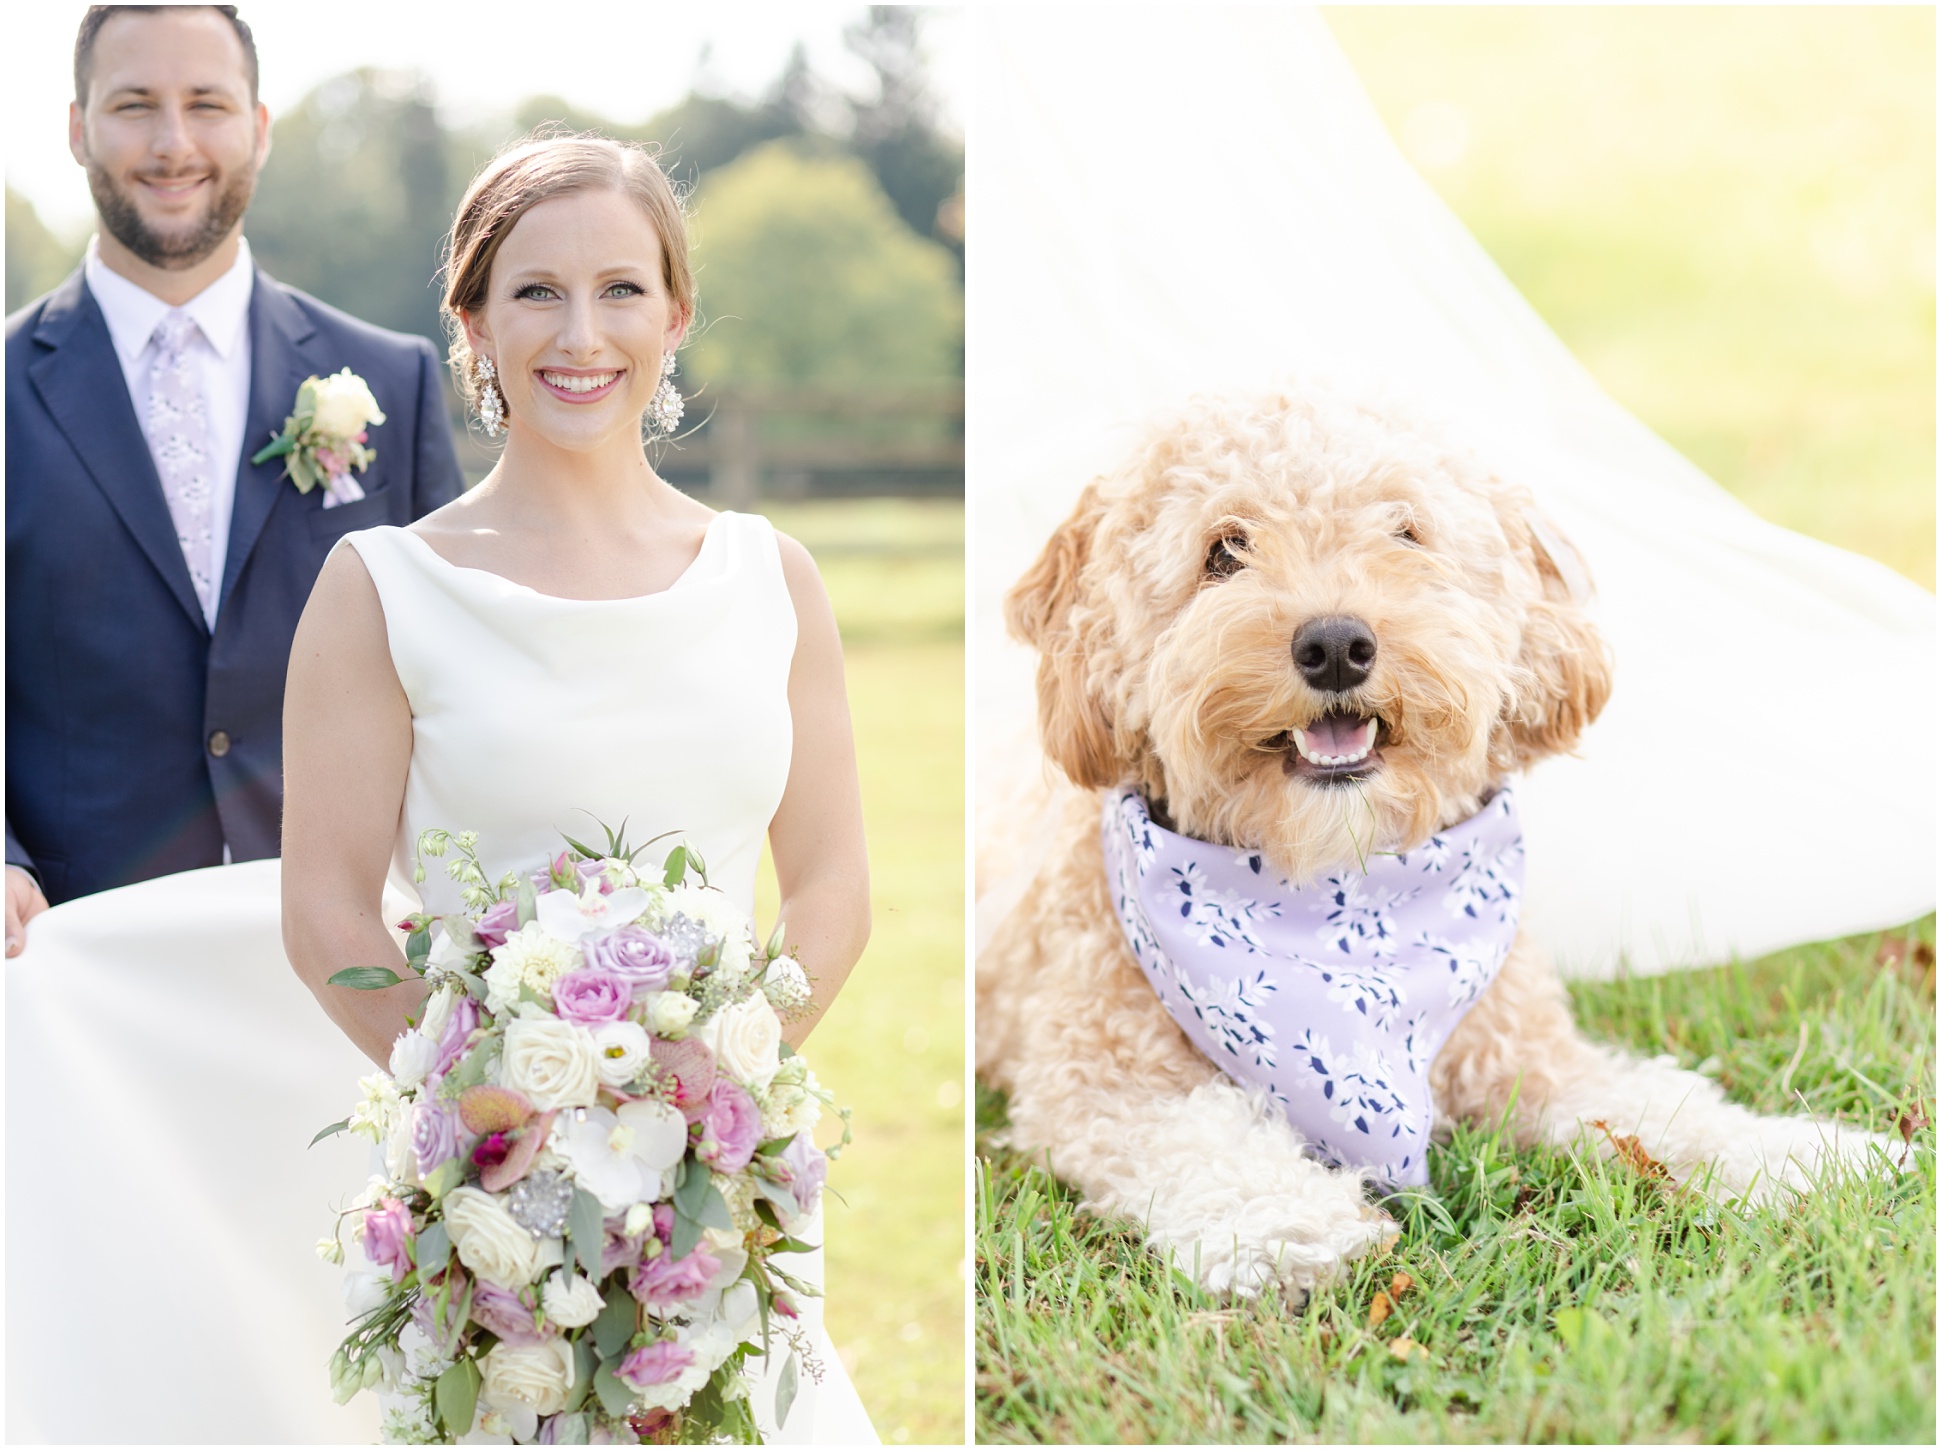 Left: Bride and groom looking at camera, Right: Puppy hiding under the bride's veil